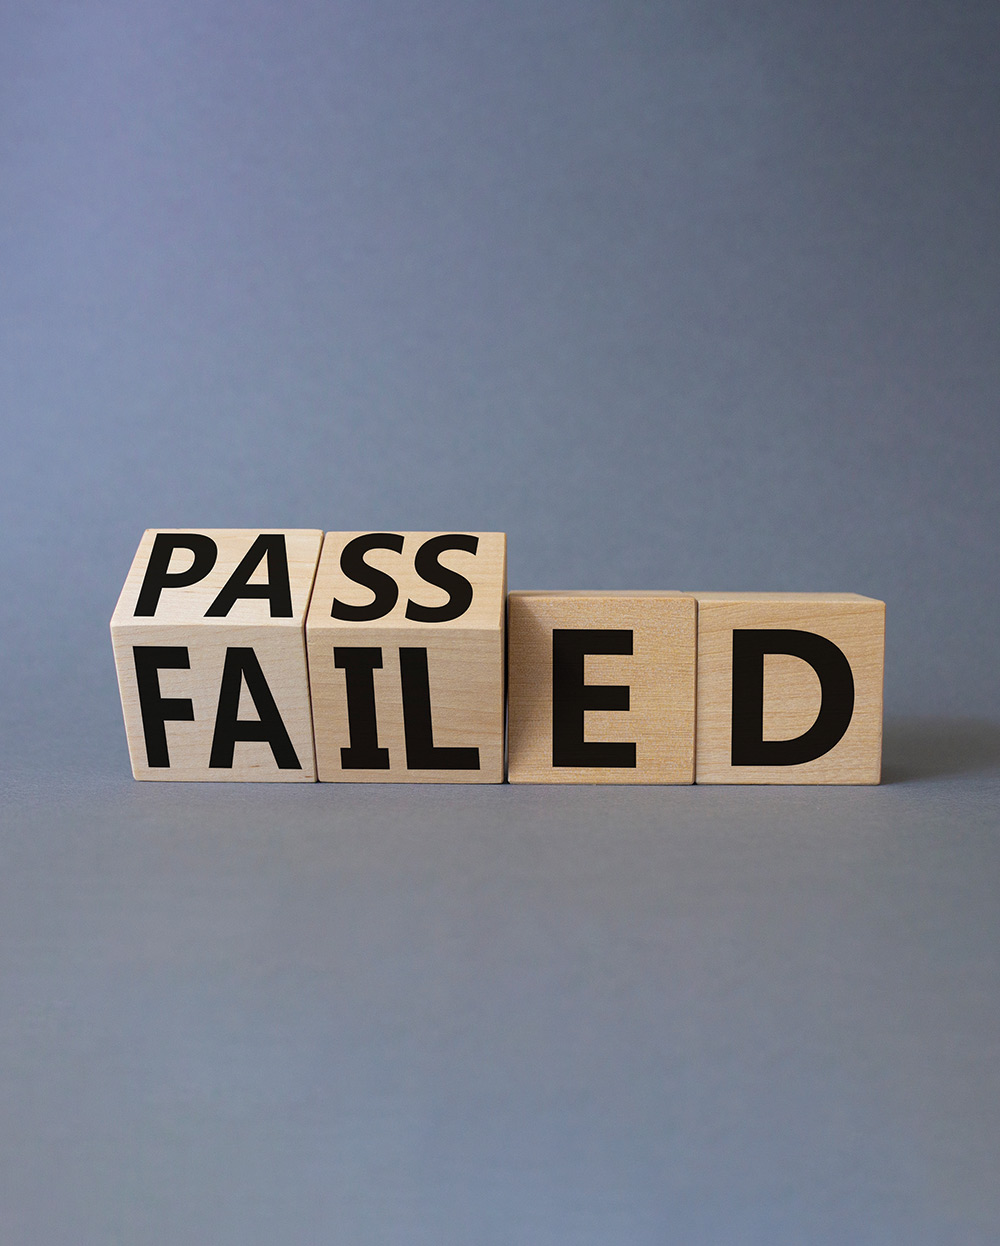 Four small wooden square blocks with first two wooden square blocks showing the word PASS facing upward on top while the word FAIL is facing downward on bottom and last two wooden square blocks showing the letters ED facing front/forward